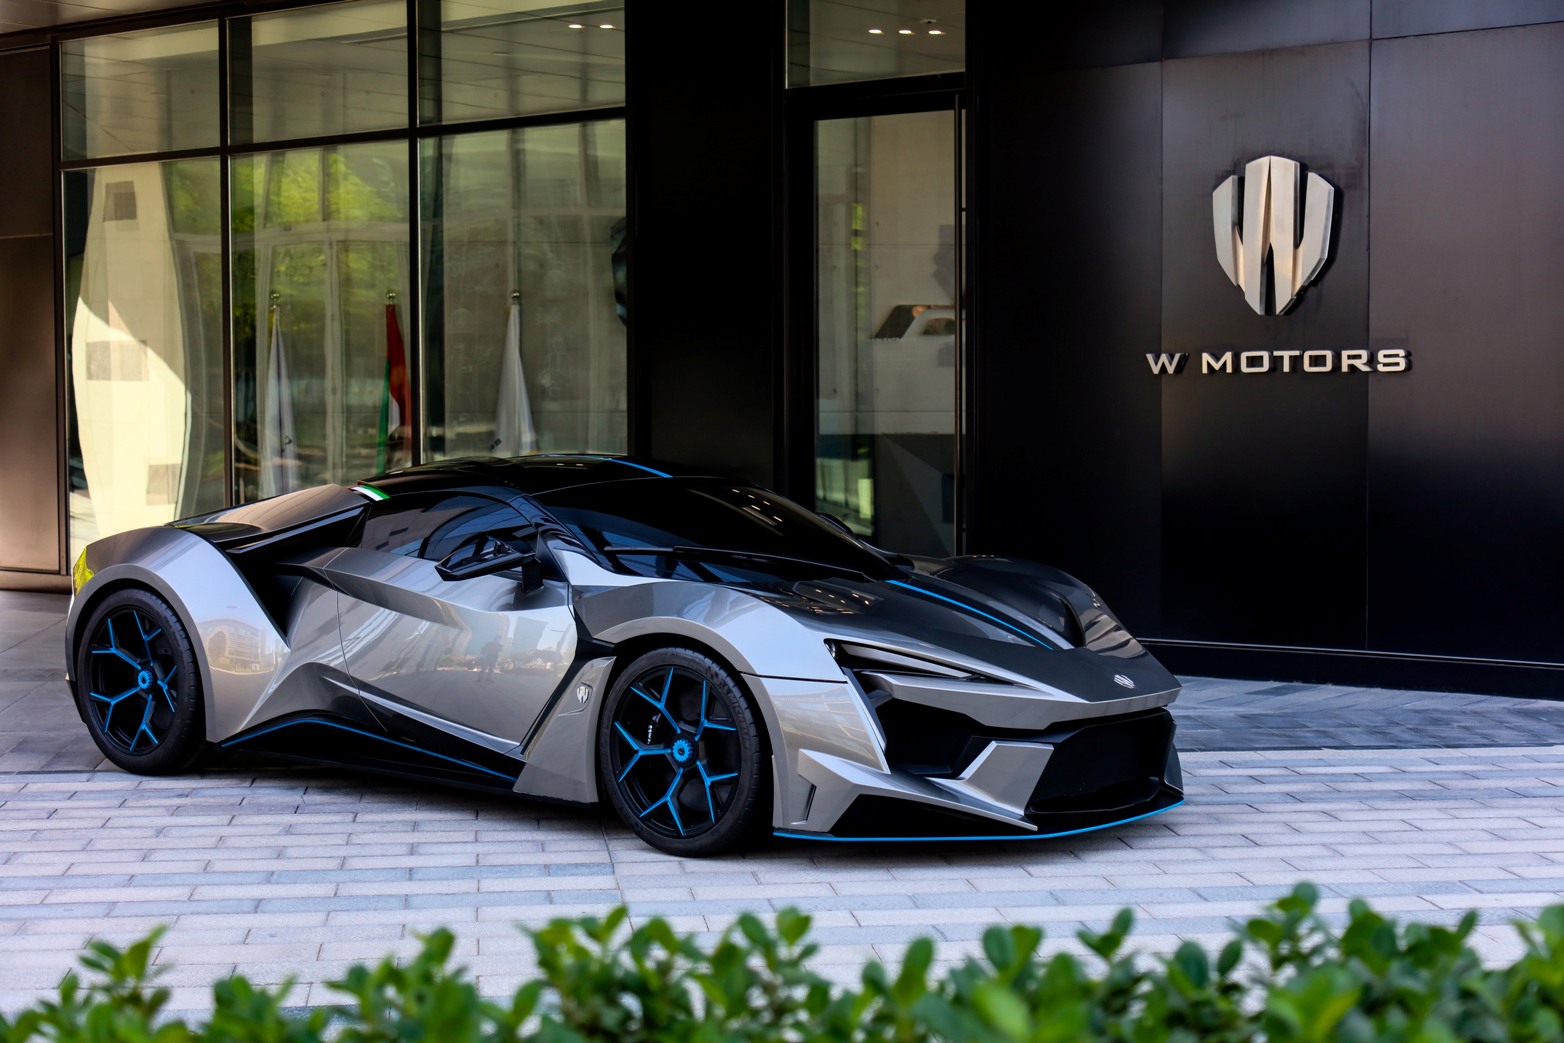 W Motors’ Fenyr SuperSport to Be Offered to One Lucky Winner as Part of “DSF Supercar Raffle”